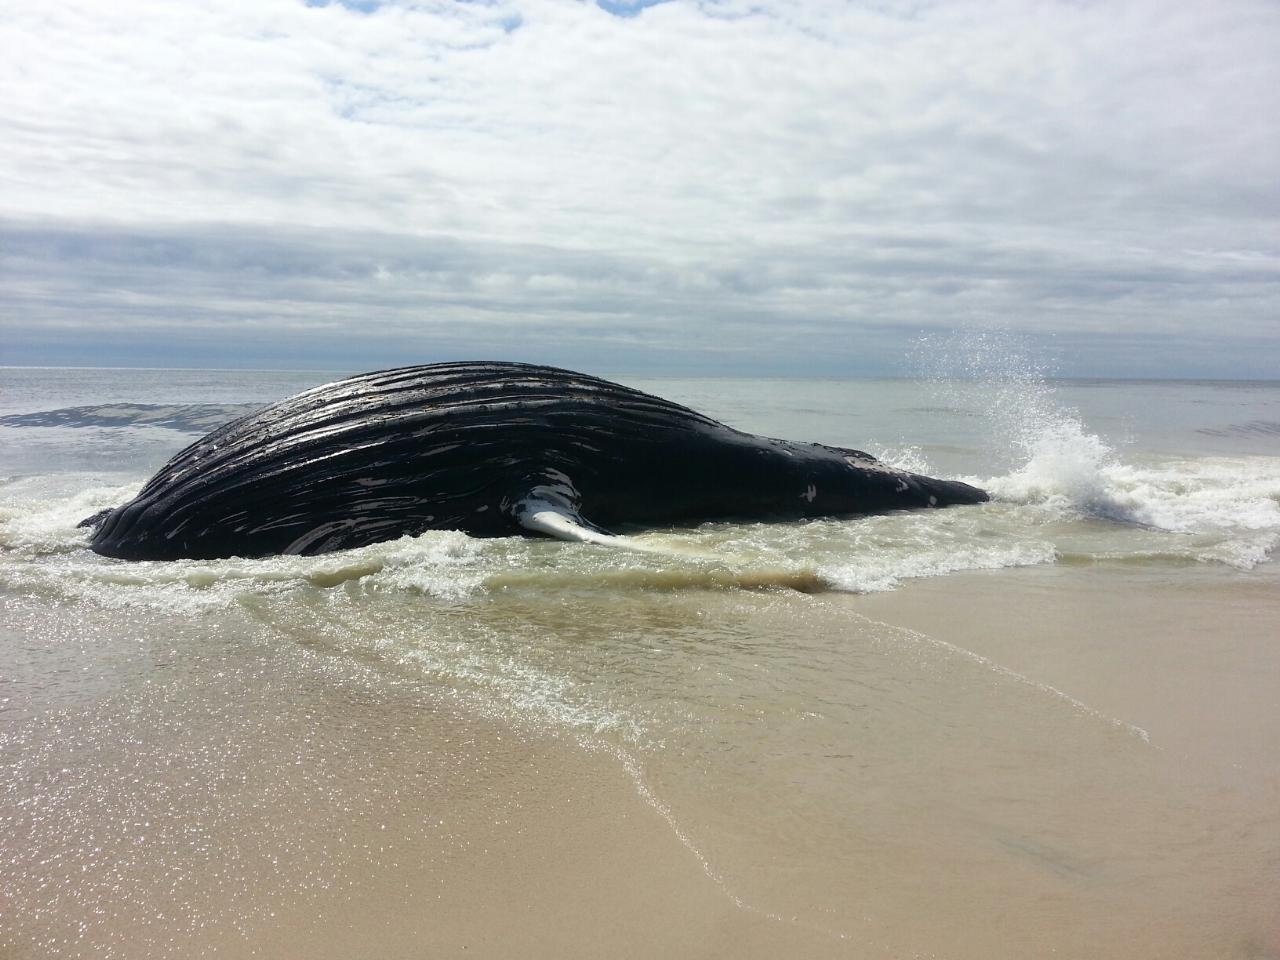 Beached whale in Quogue